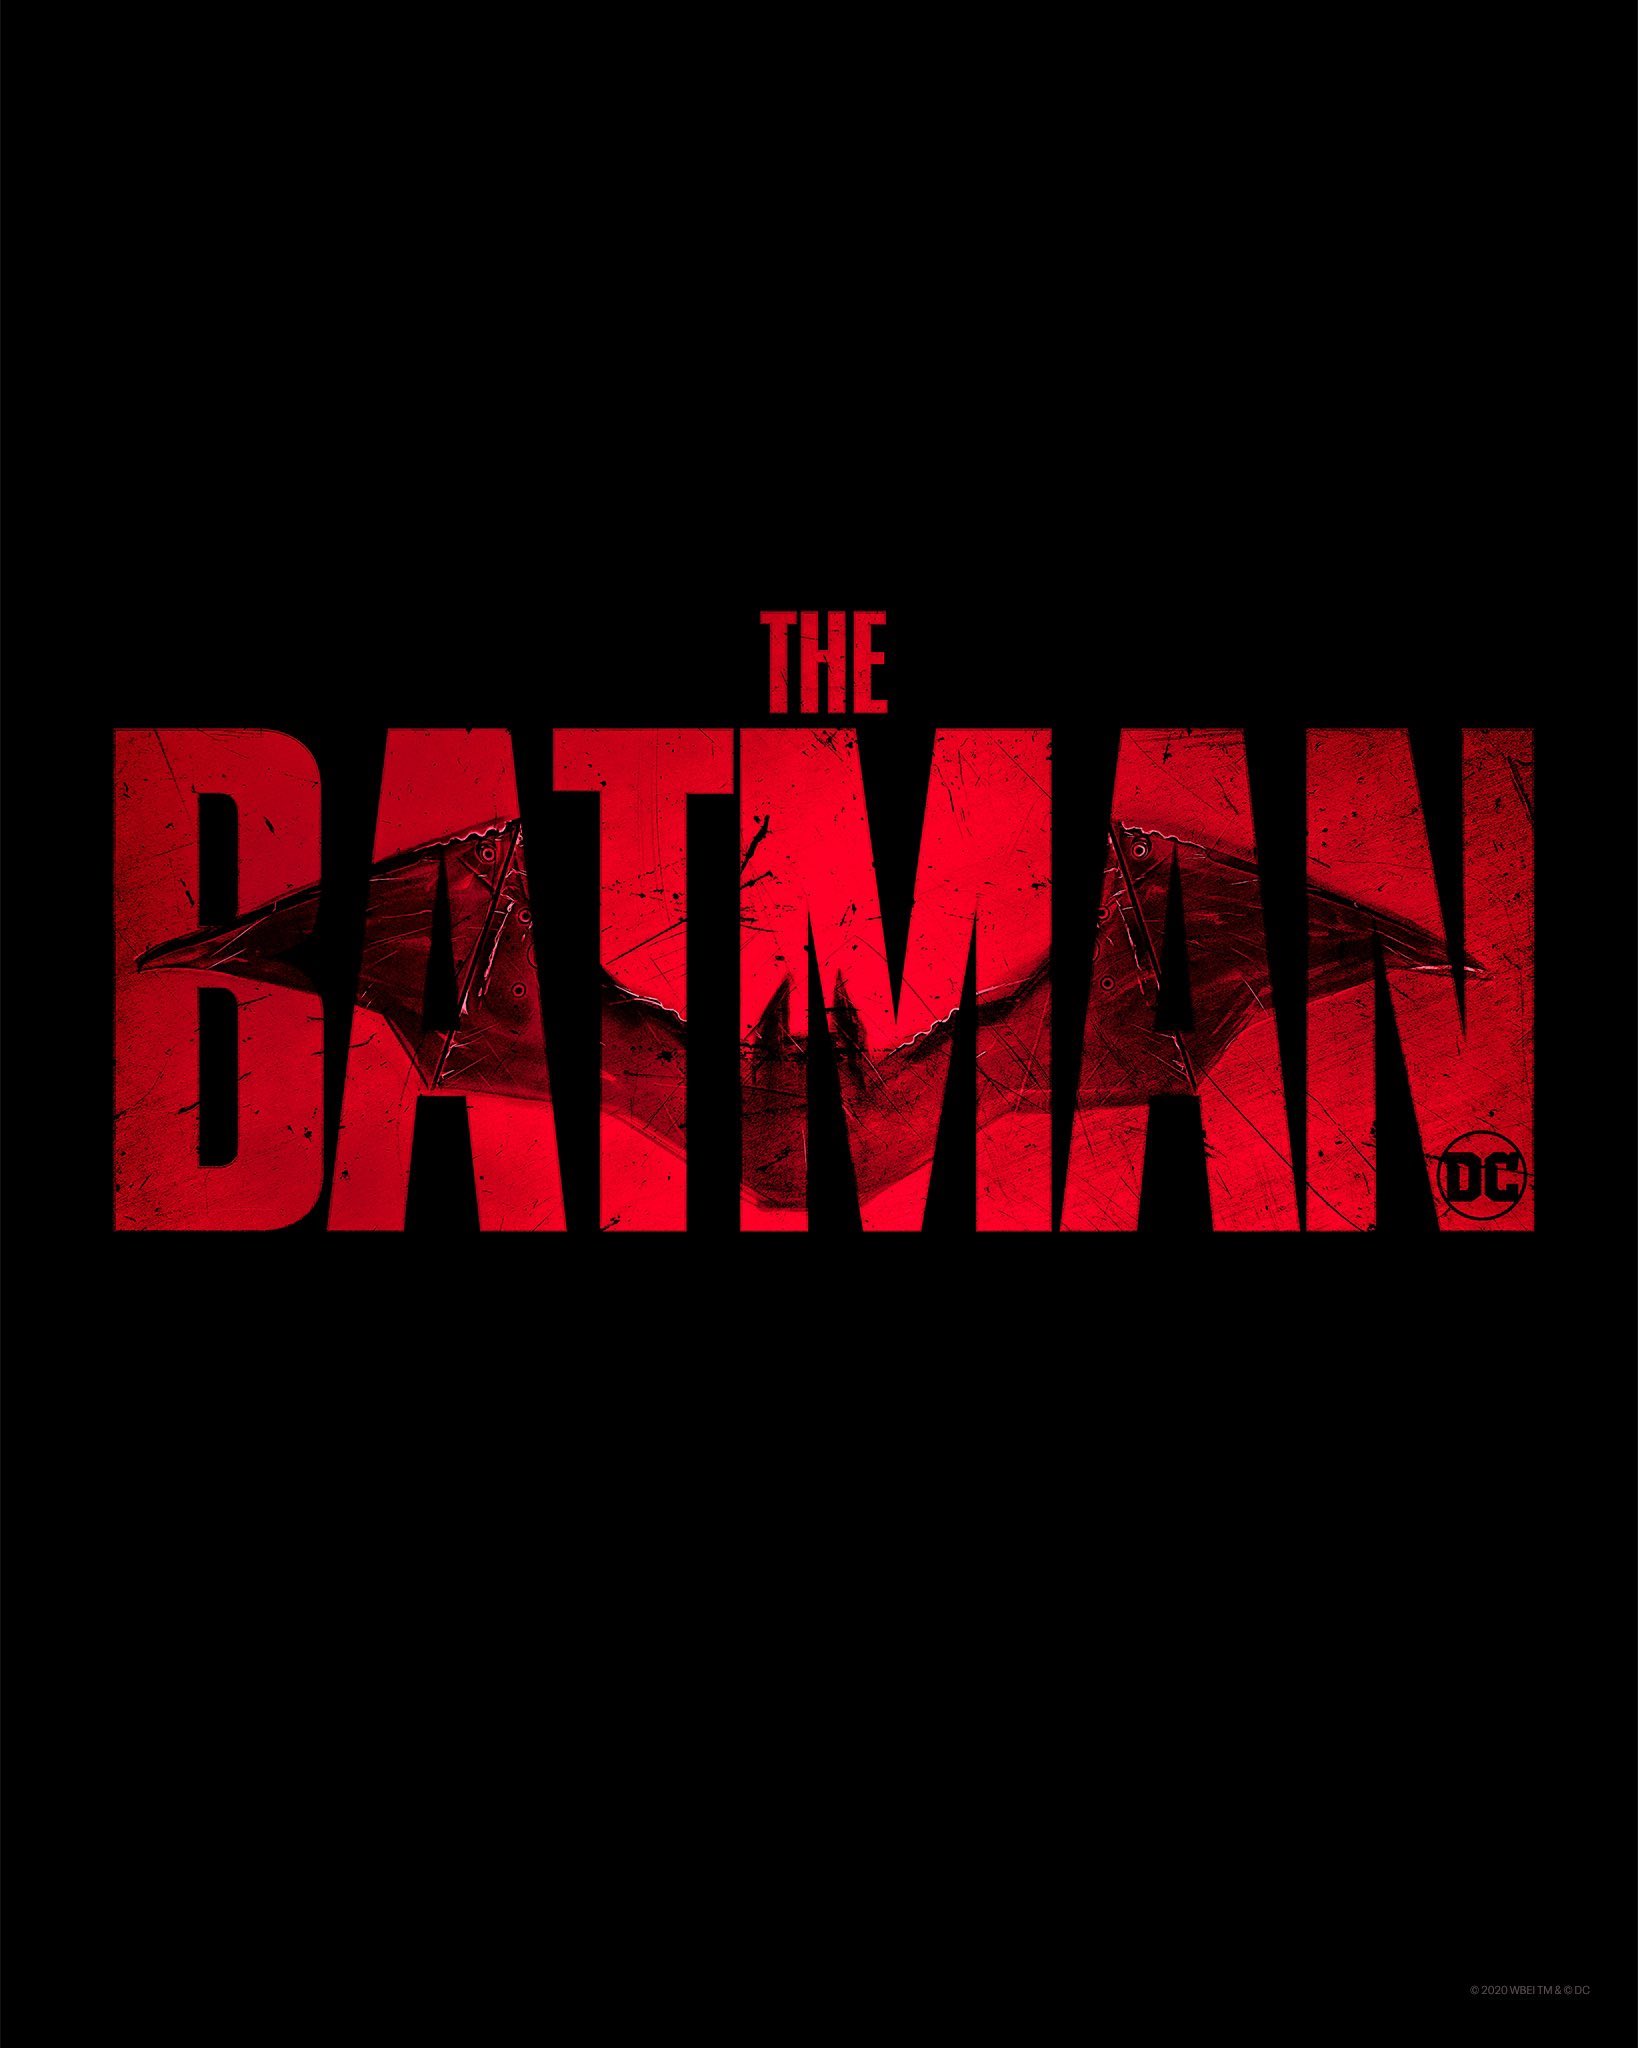 Reaction To Test Screening Of The Batman Is Positive